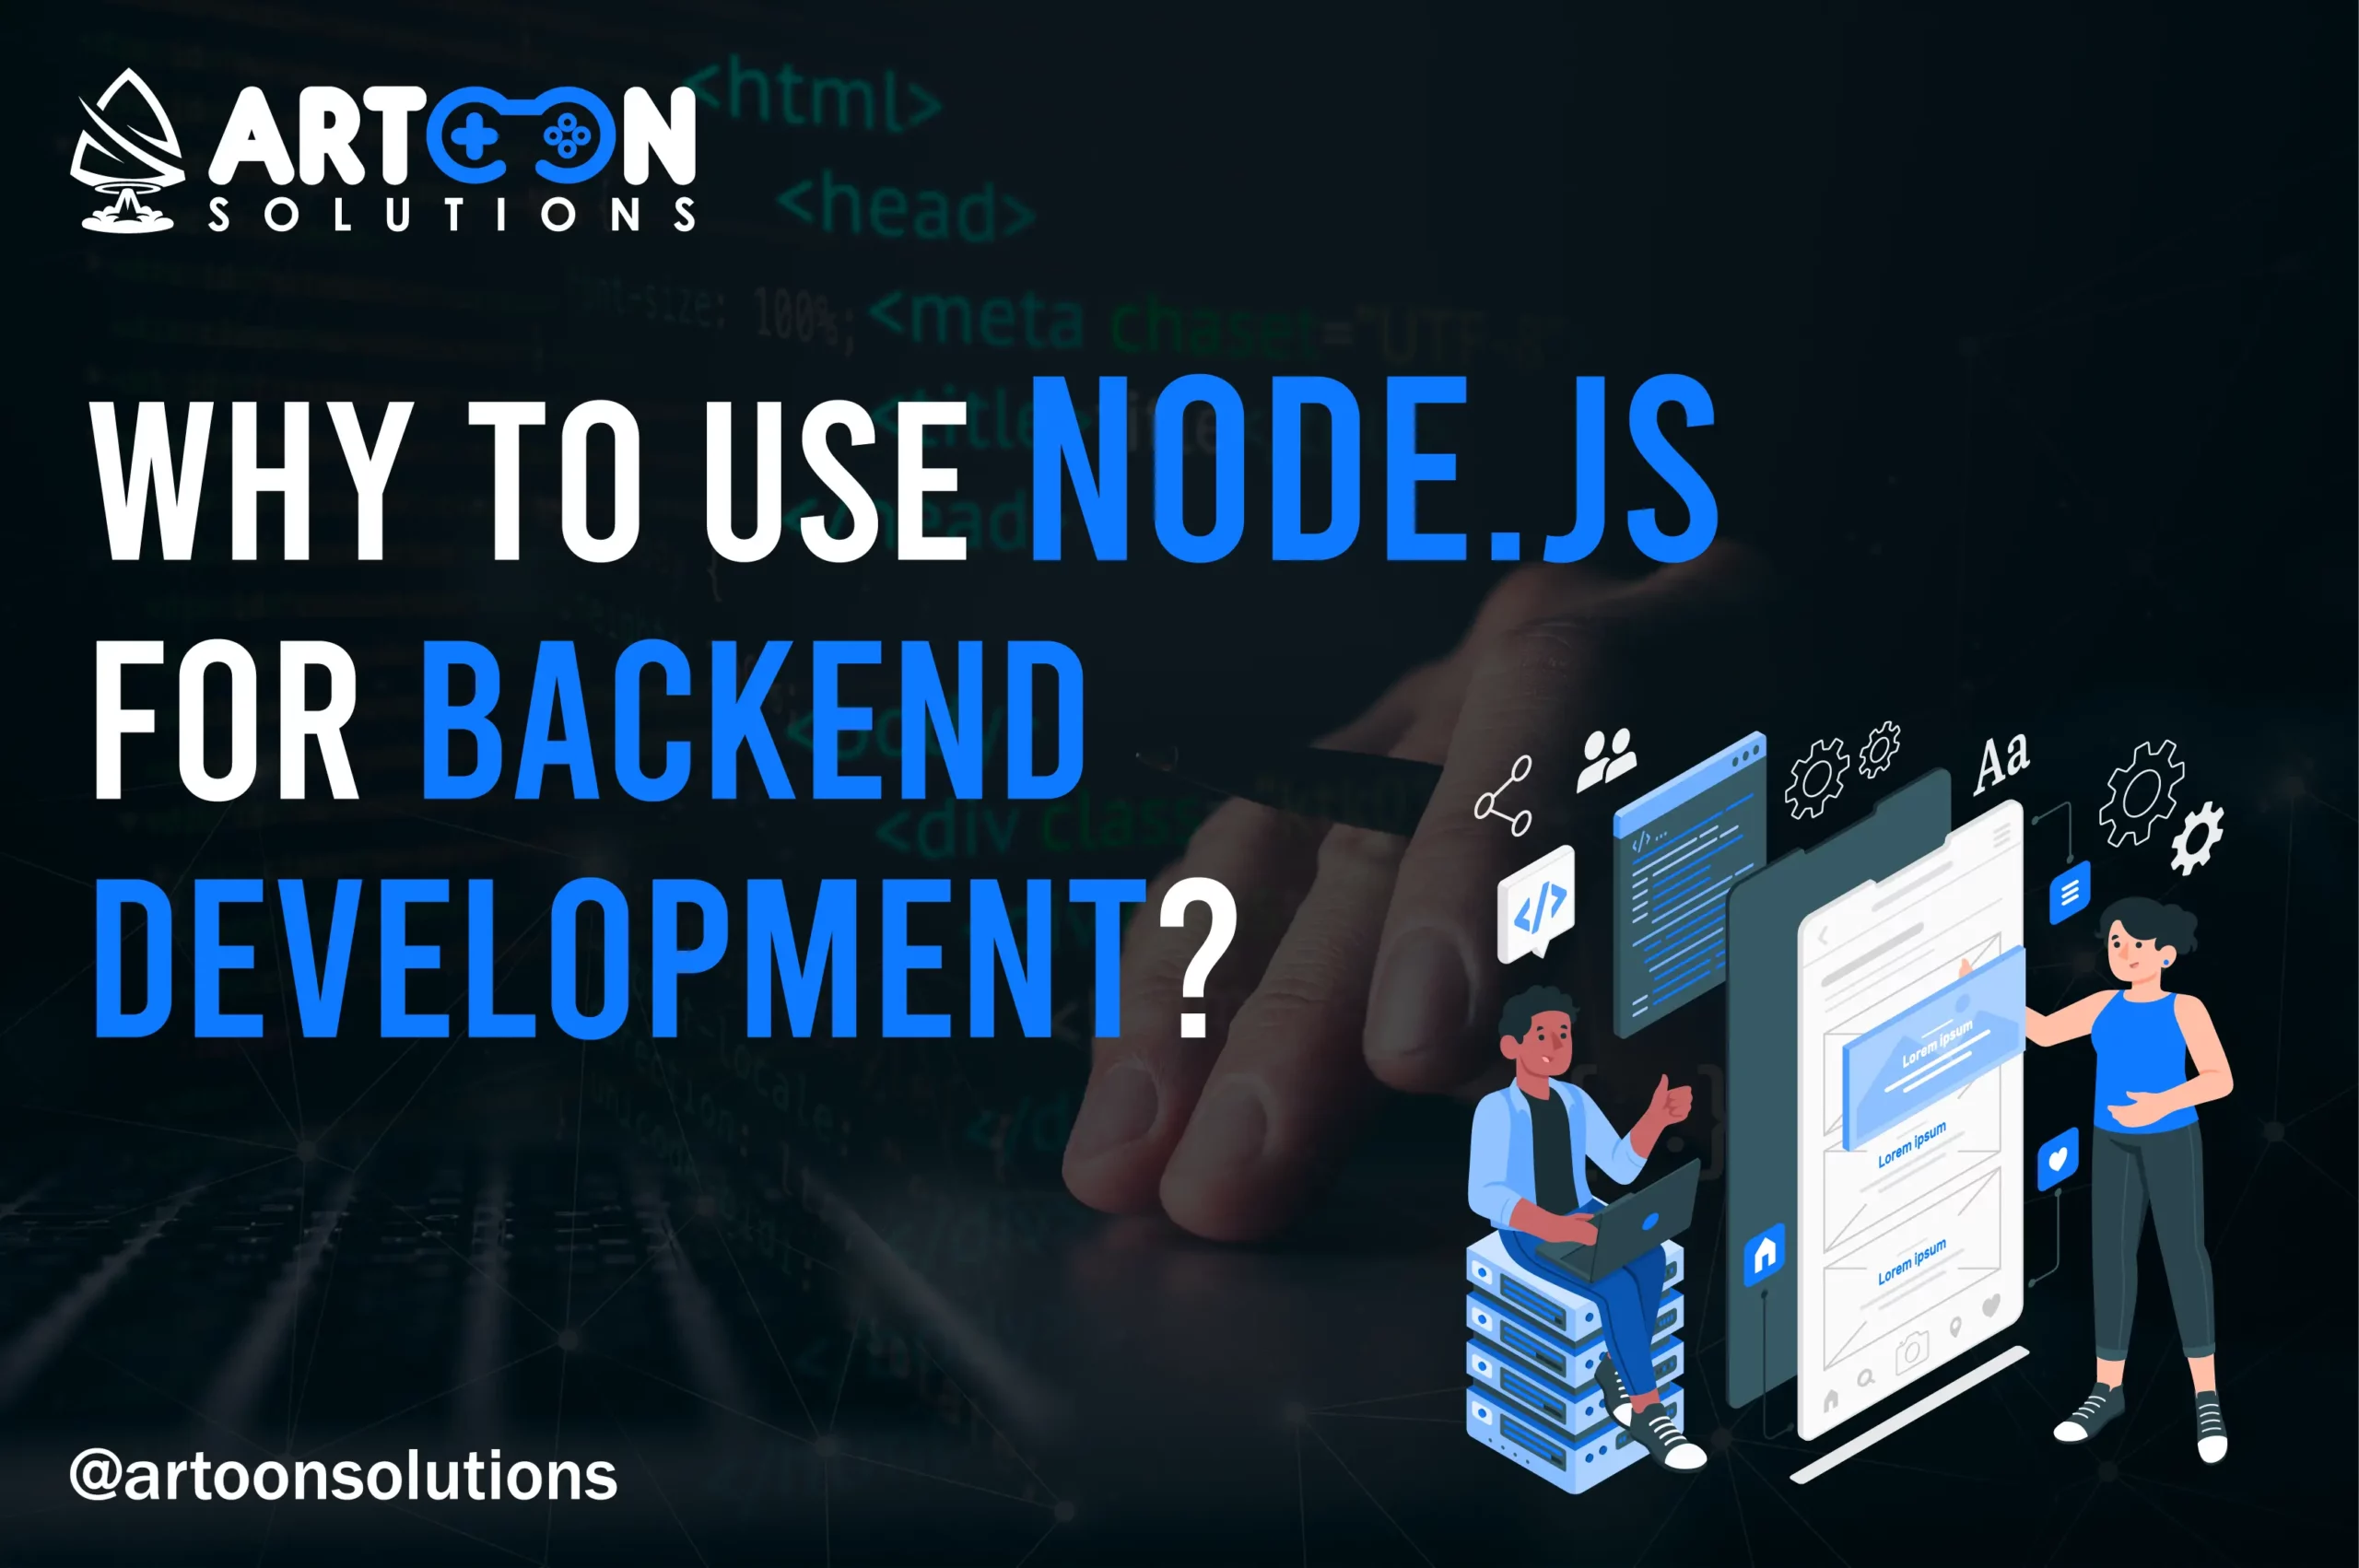 Why to Use Node.js For Backend Development?